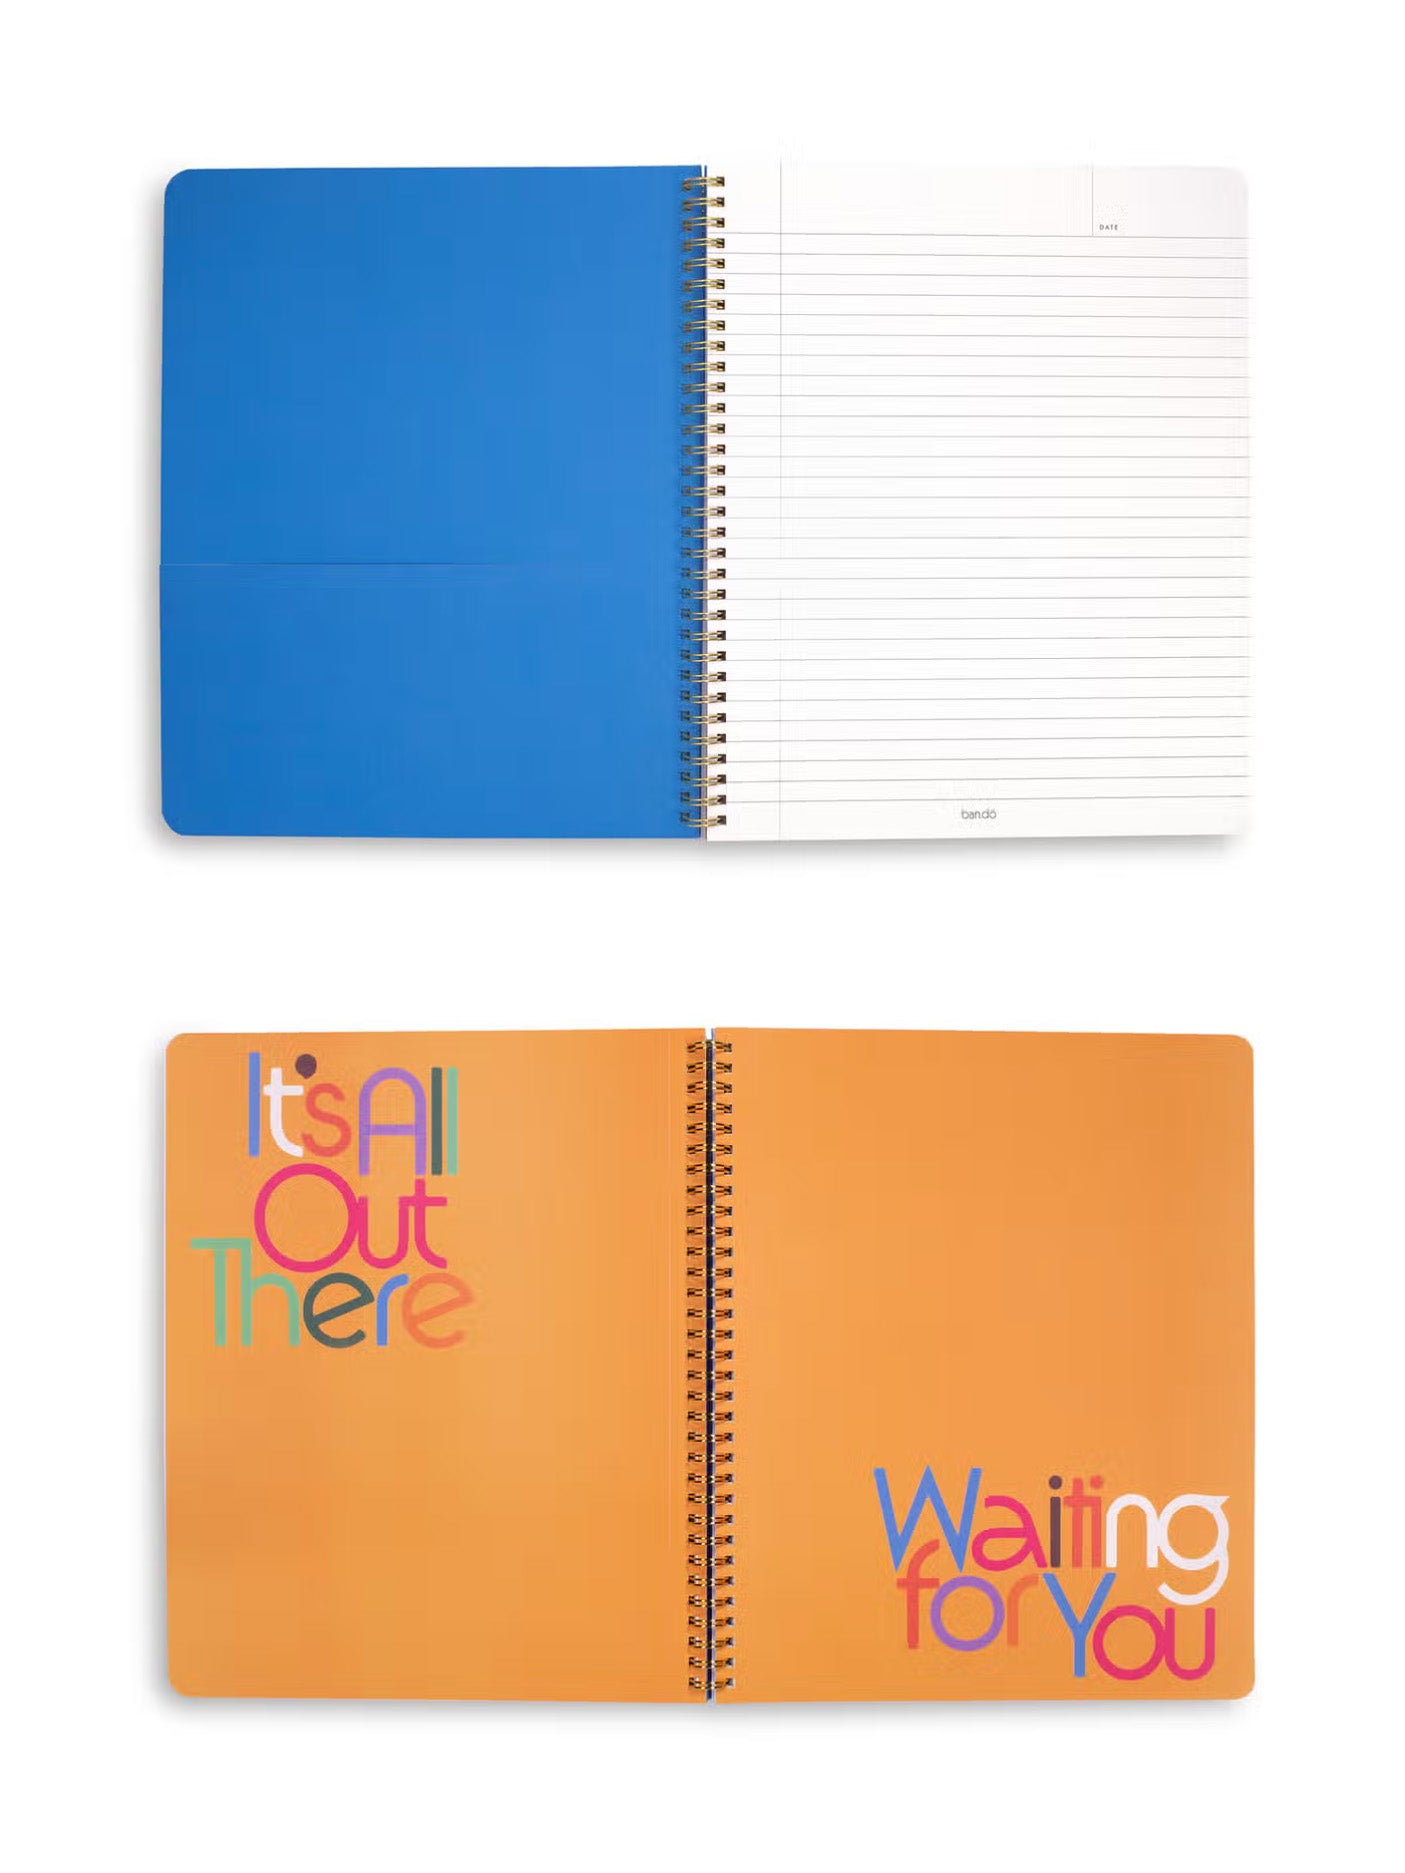 the possibilities are endless notebook